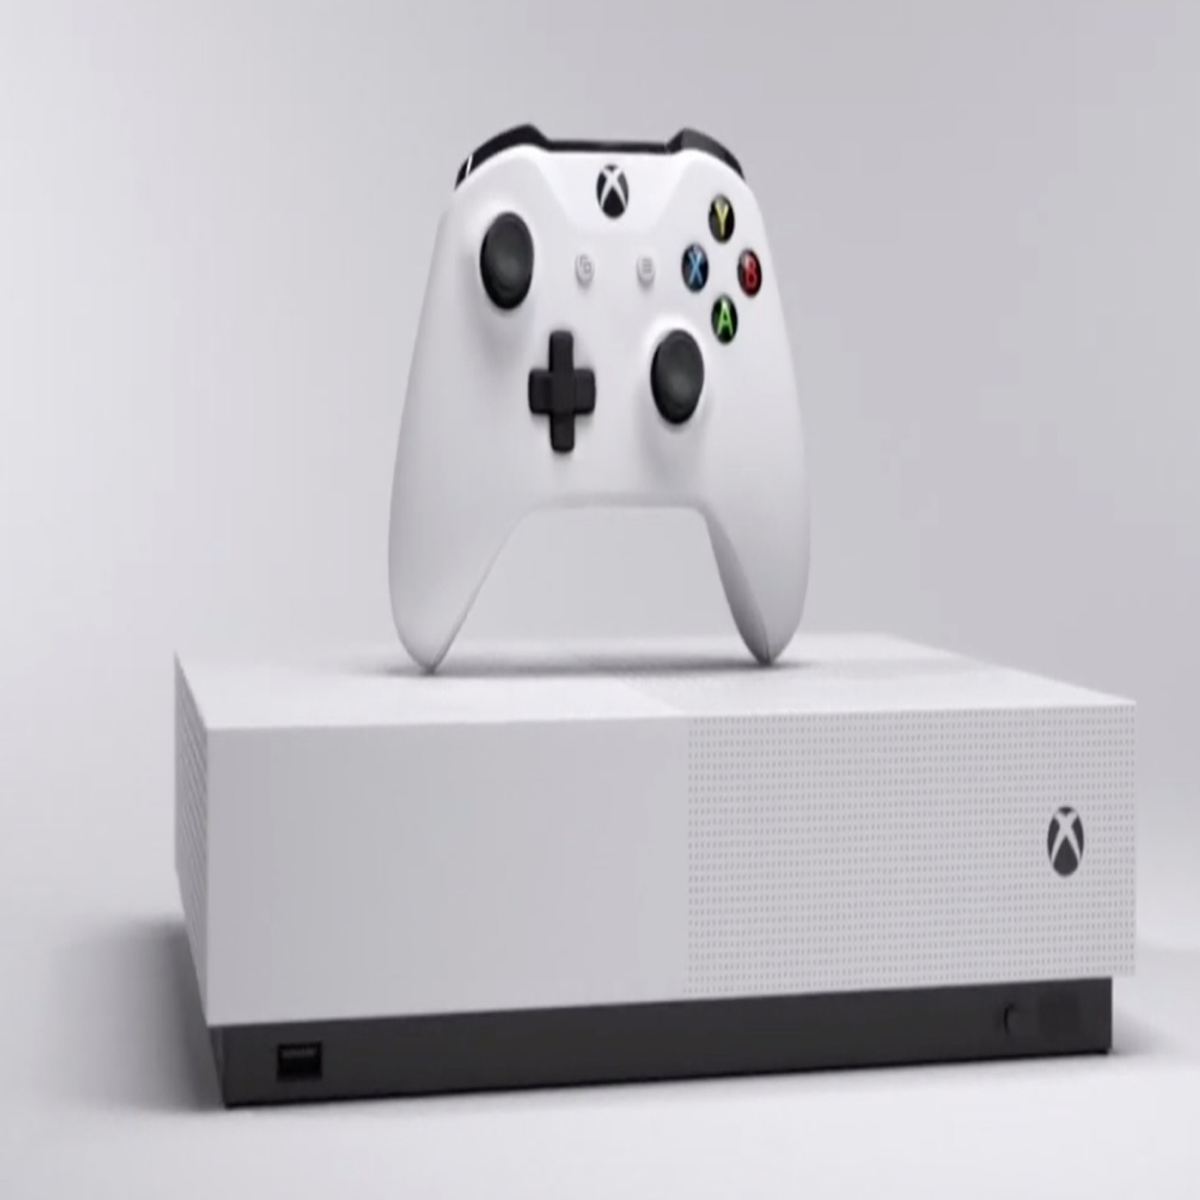 A cheaper Xbox One? Microsoft may be prepping a disc-less Xbox update